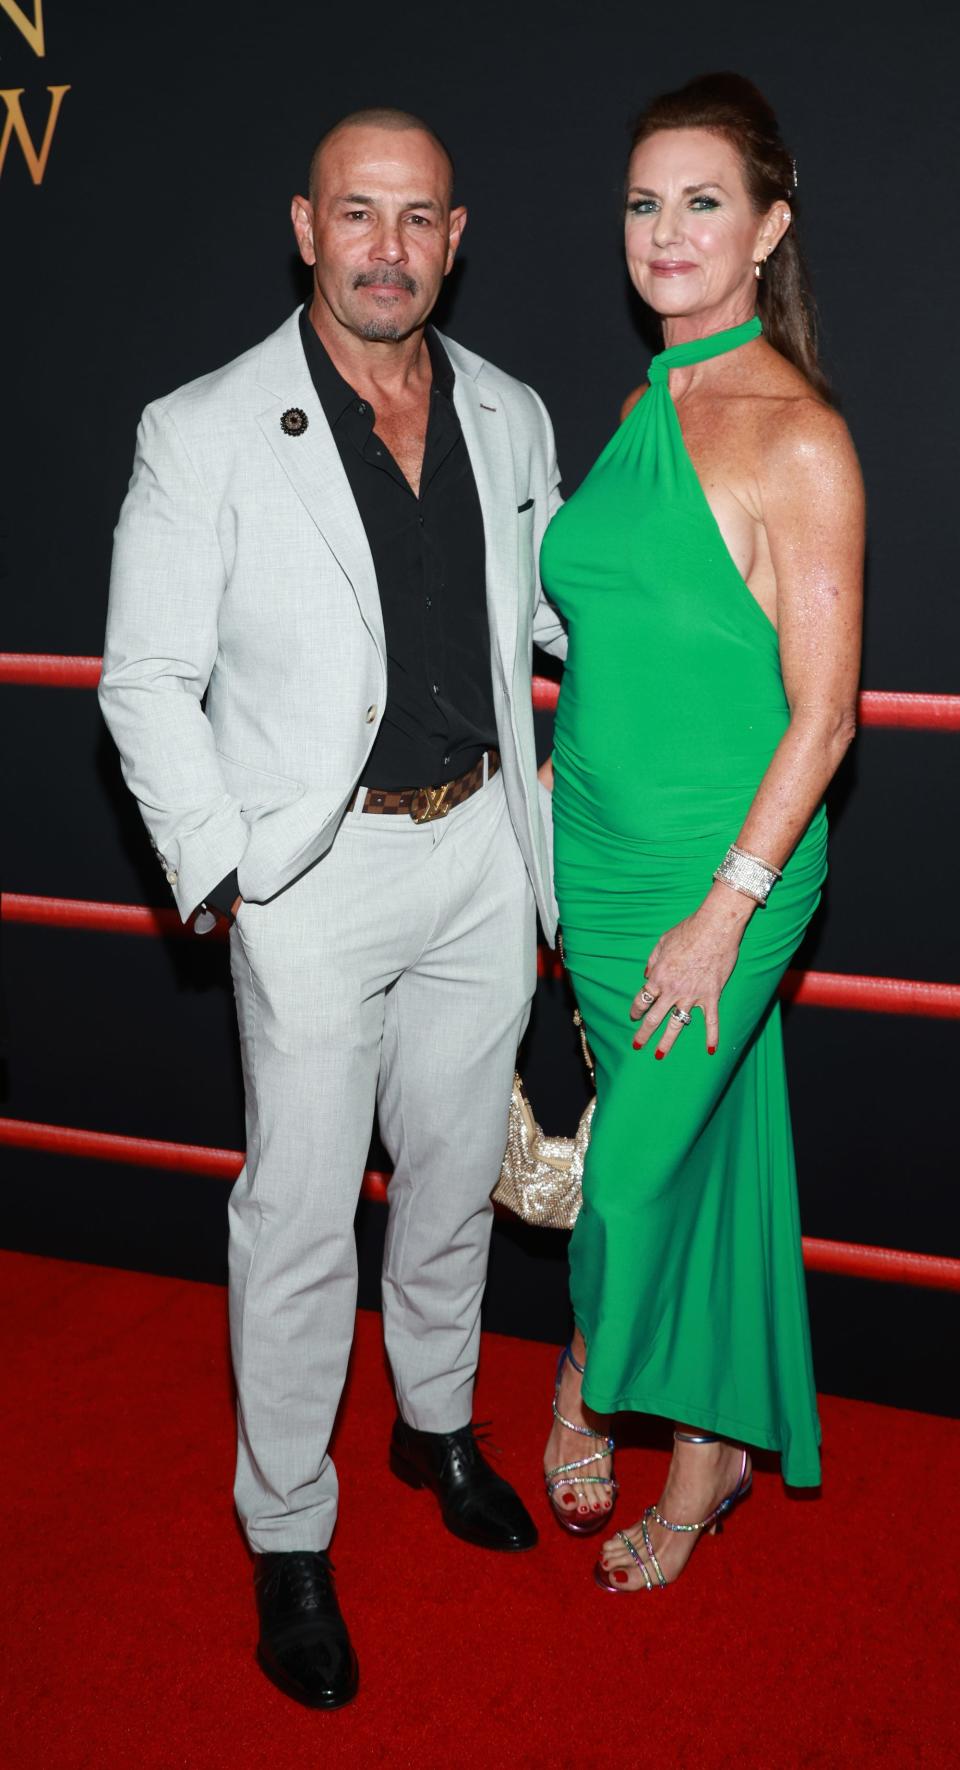 Chavo Guerrero Jr. in a white suit and his wife Susan Guerrero in a green dress at "The Iron Claw" premiere